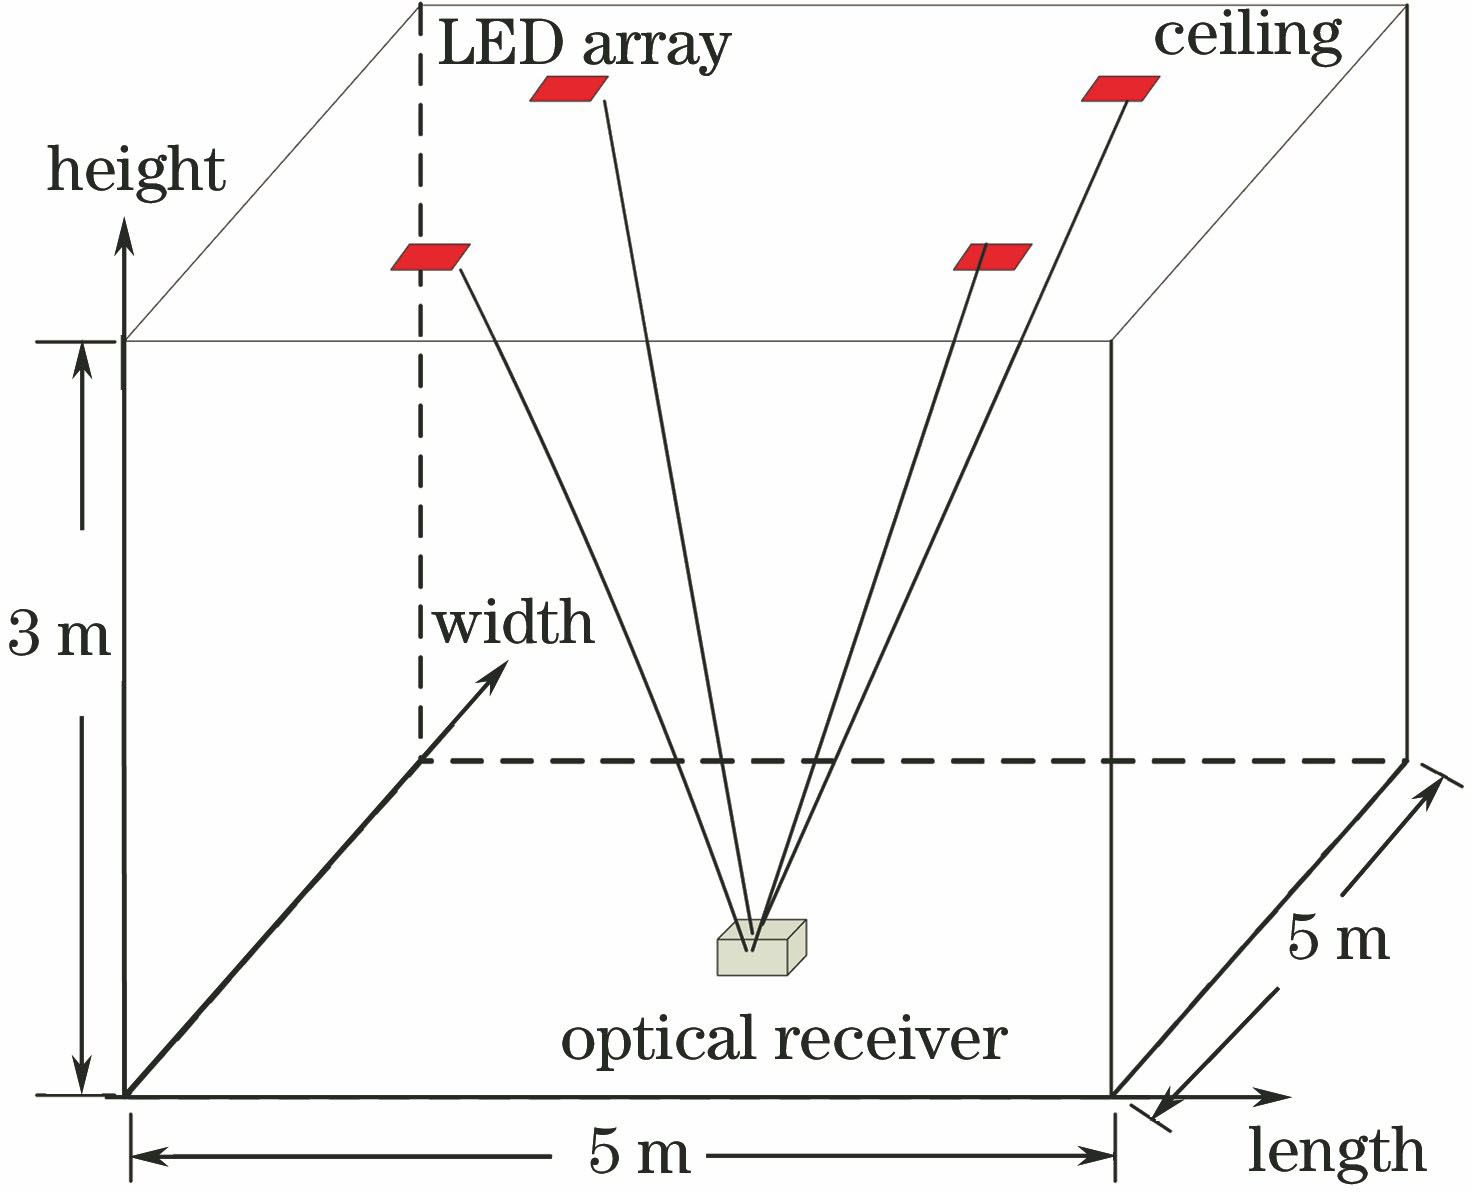 System model of visible light positioning